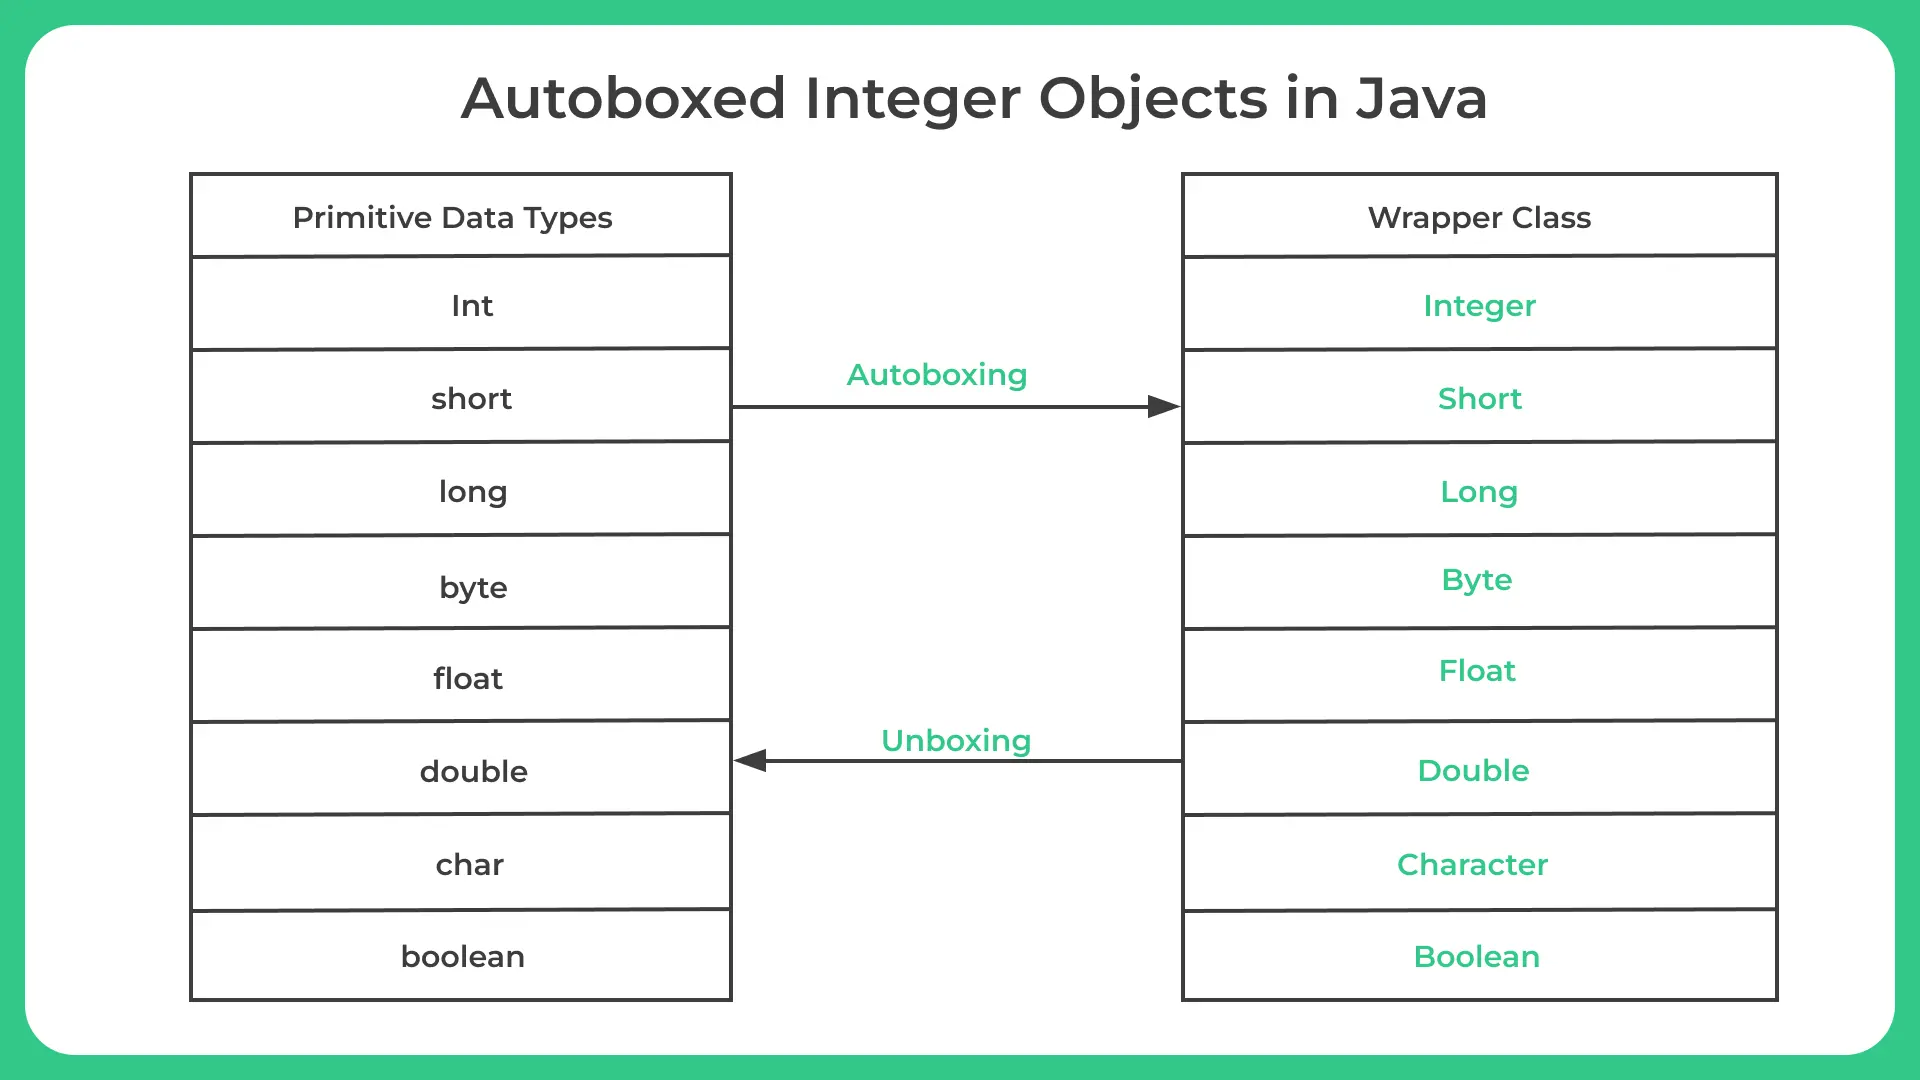 Autoboxed integer objects